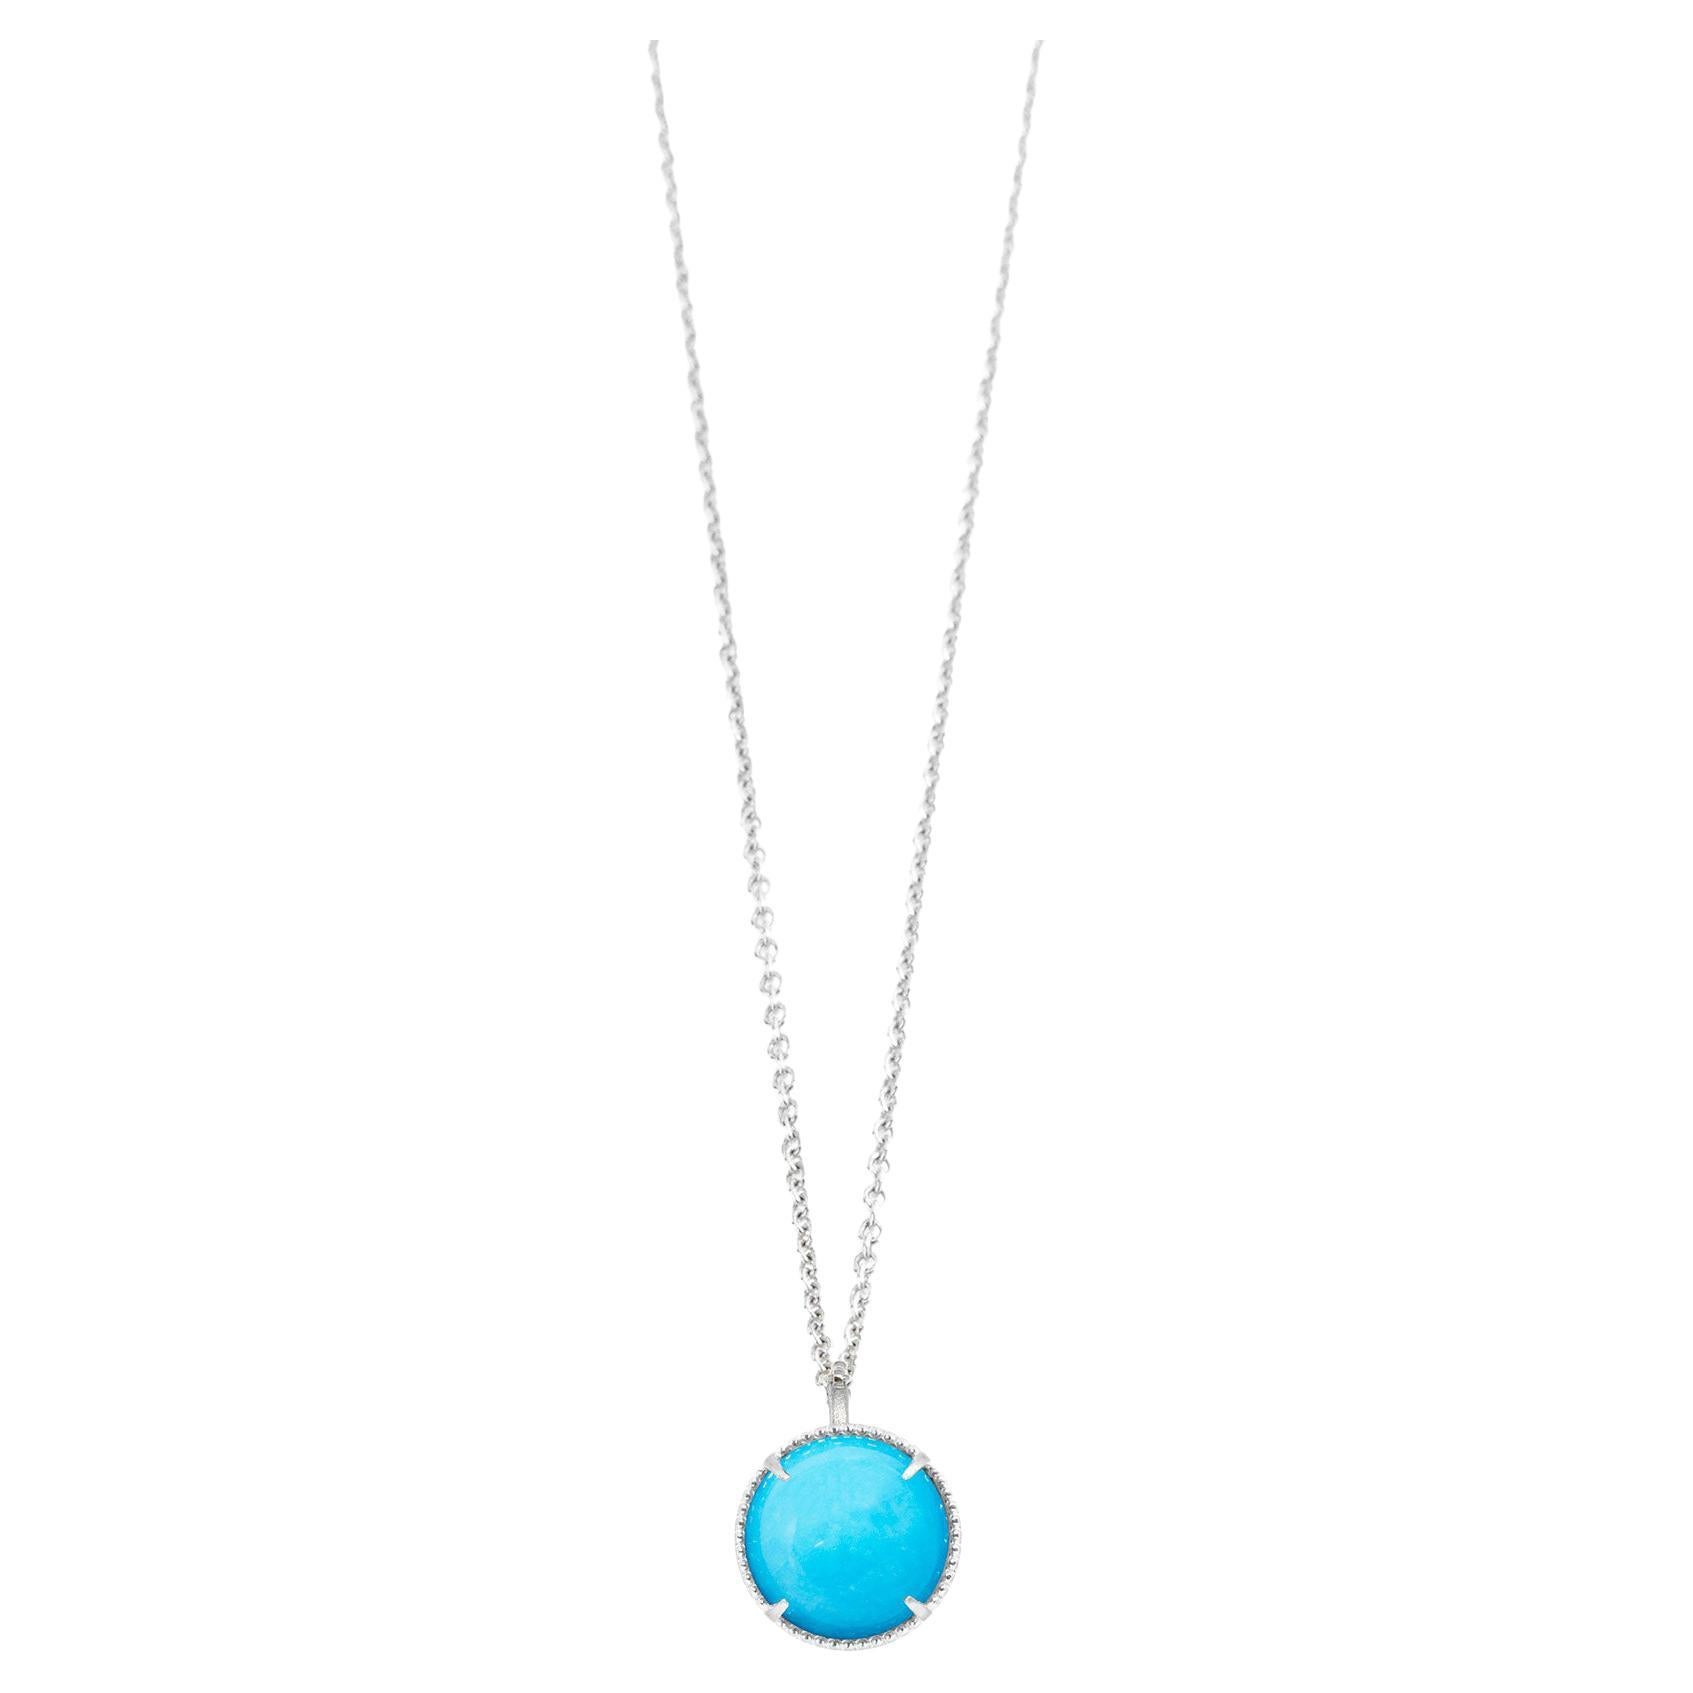 New Nina Nguyen Petal Necklace Turquoise Crinkle Chain Sterling Gold Vermeil